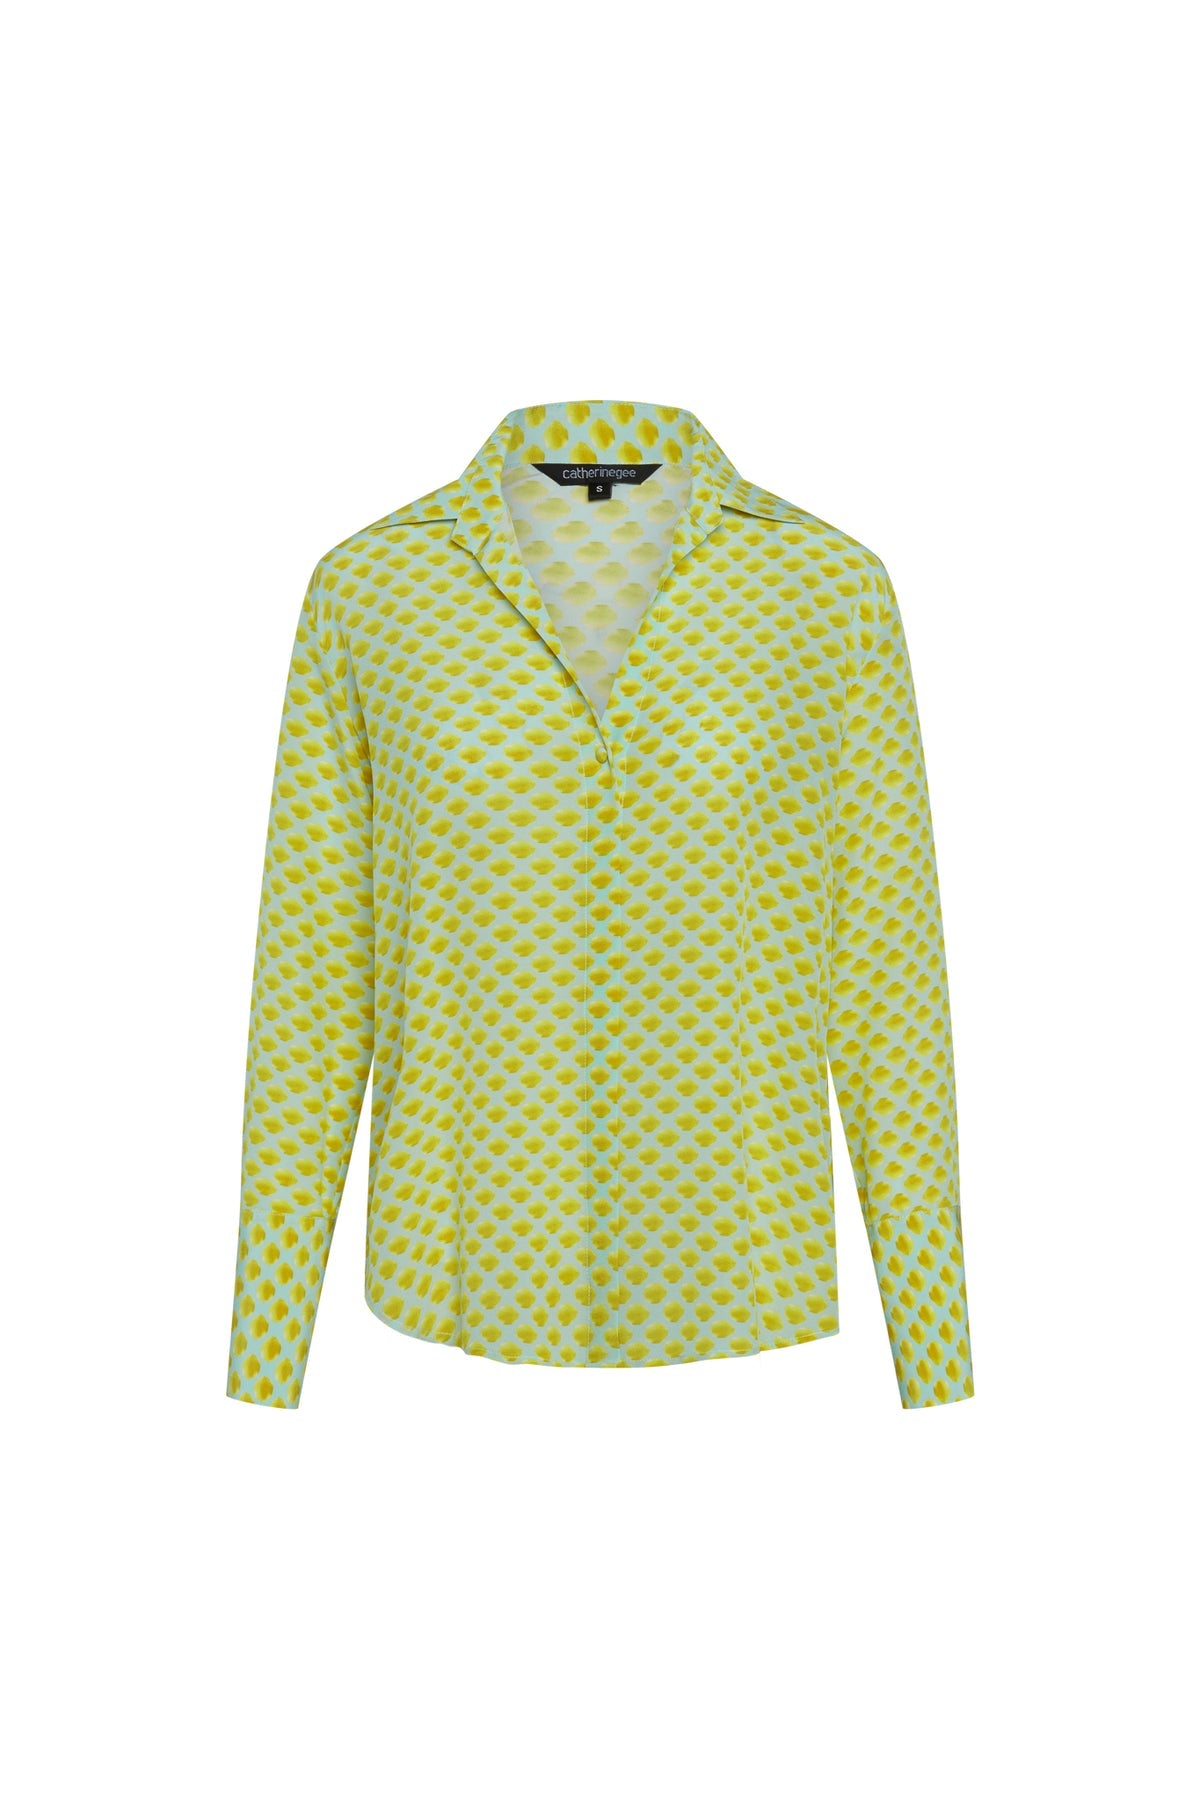 Catherine Gee Daria French Cuff Silk Blouse - Limon Blue